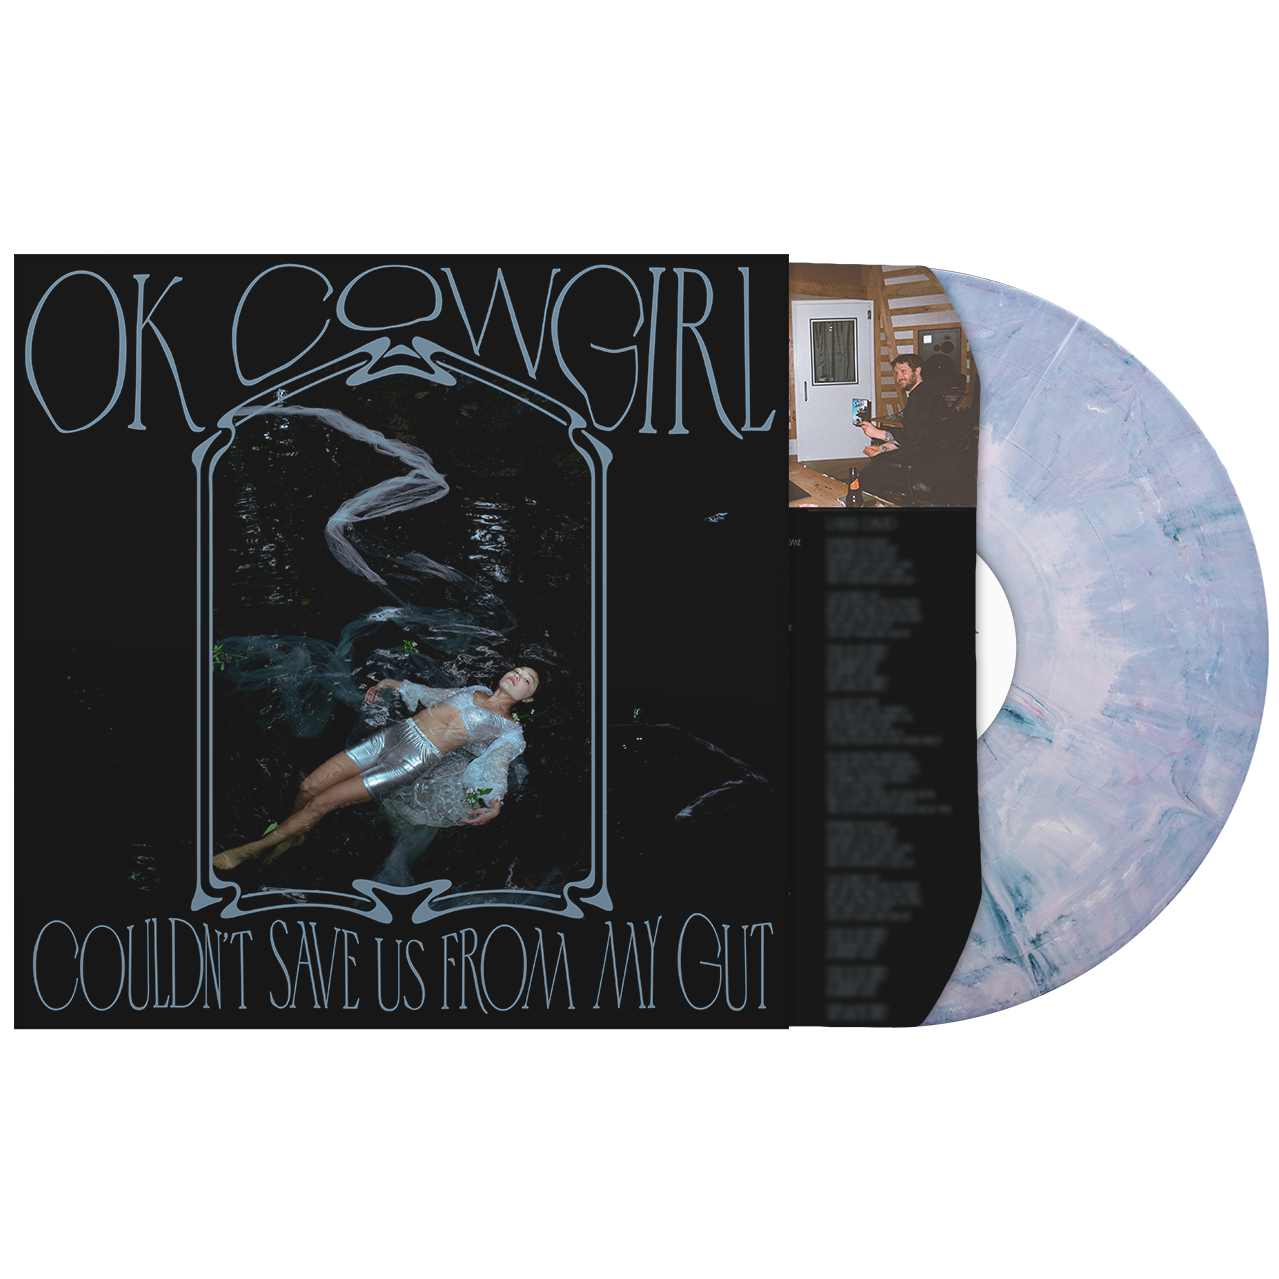 Ok Cowgirl - Couldn't Save Us From My Gut LP (pre-order)